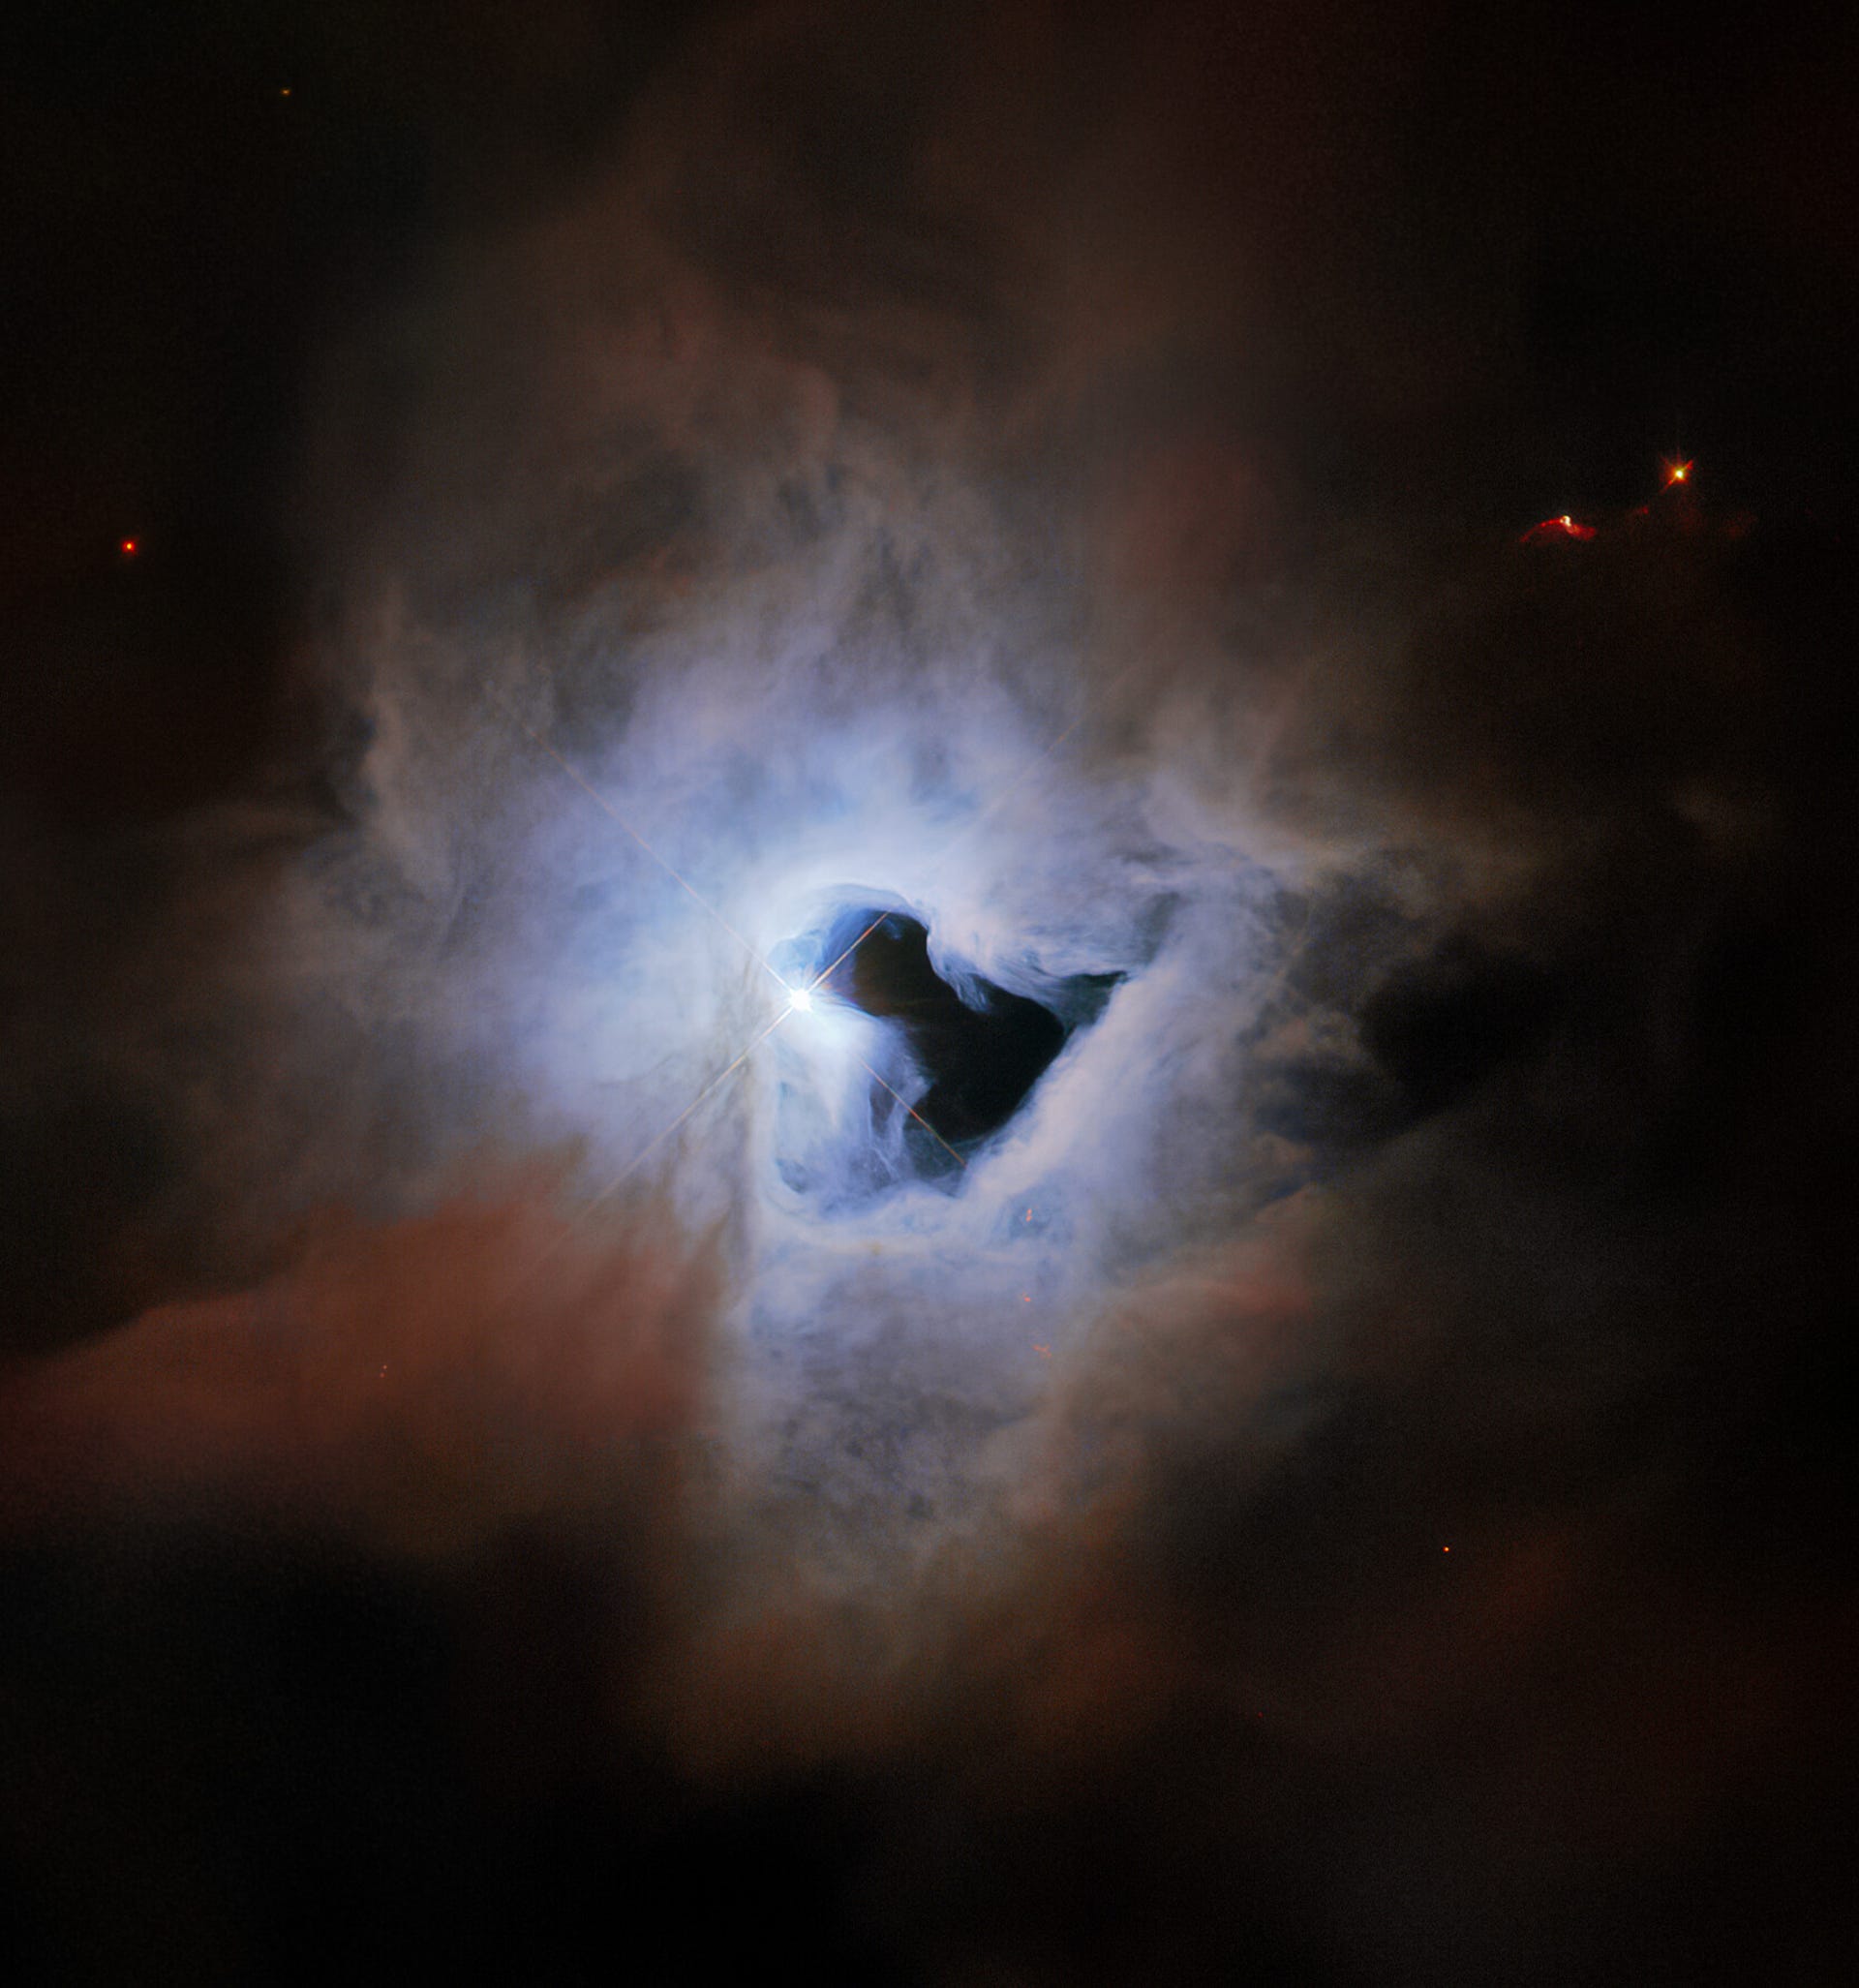 Ethereal view of a ghostly cloud with a dark, open spot in the center like a keyhole showing the dark of space behind.